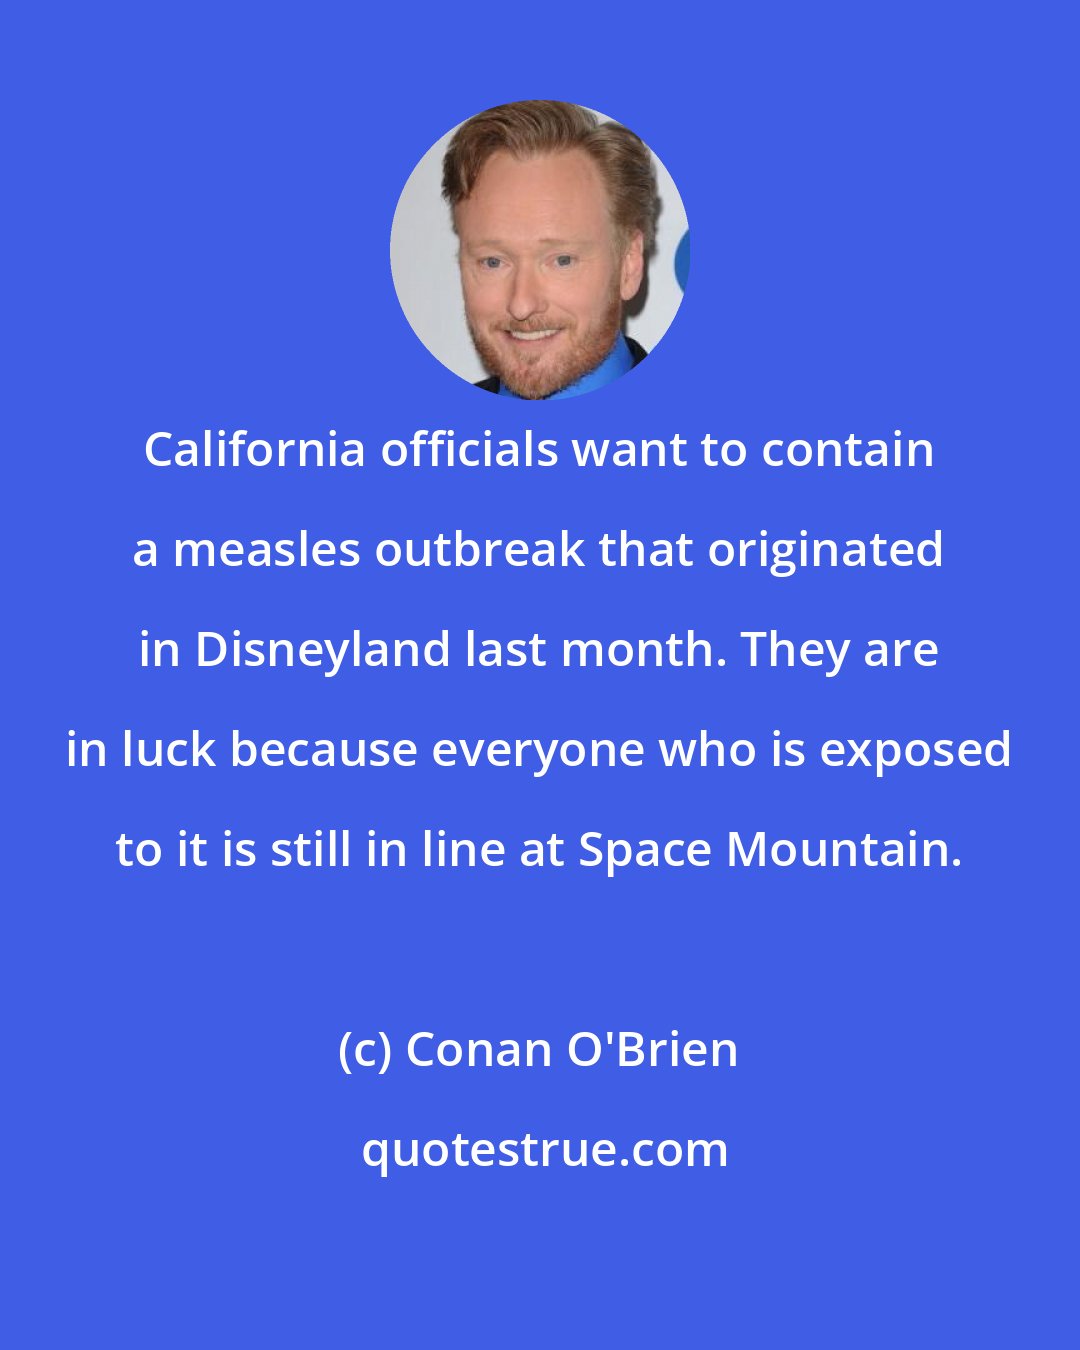 Conan O'Brien: California officials want to contain a measles outbreak that originated in Disneyland last month. They are in luck because everyone who is exposed to it is still in line at Space Mountain.